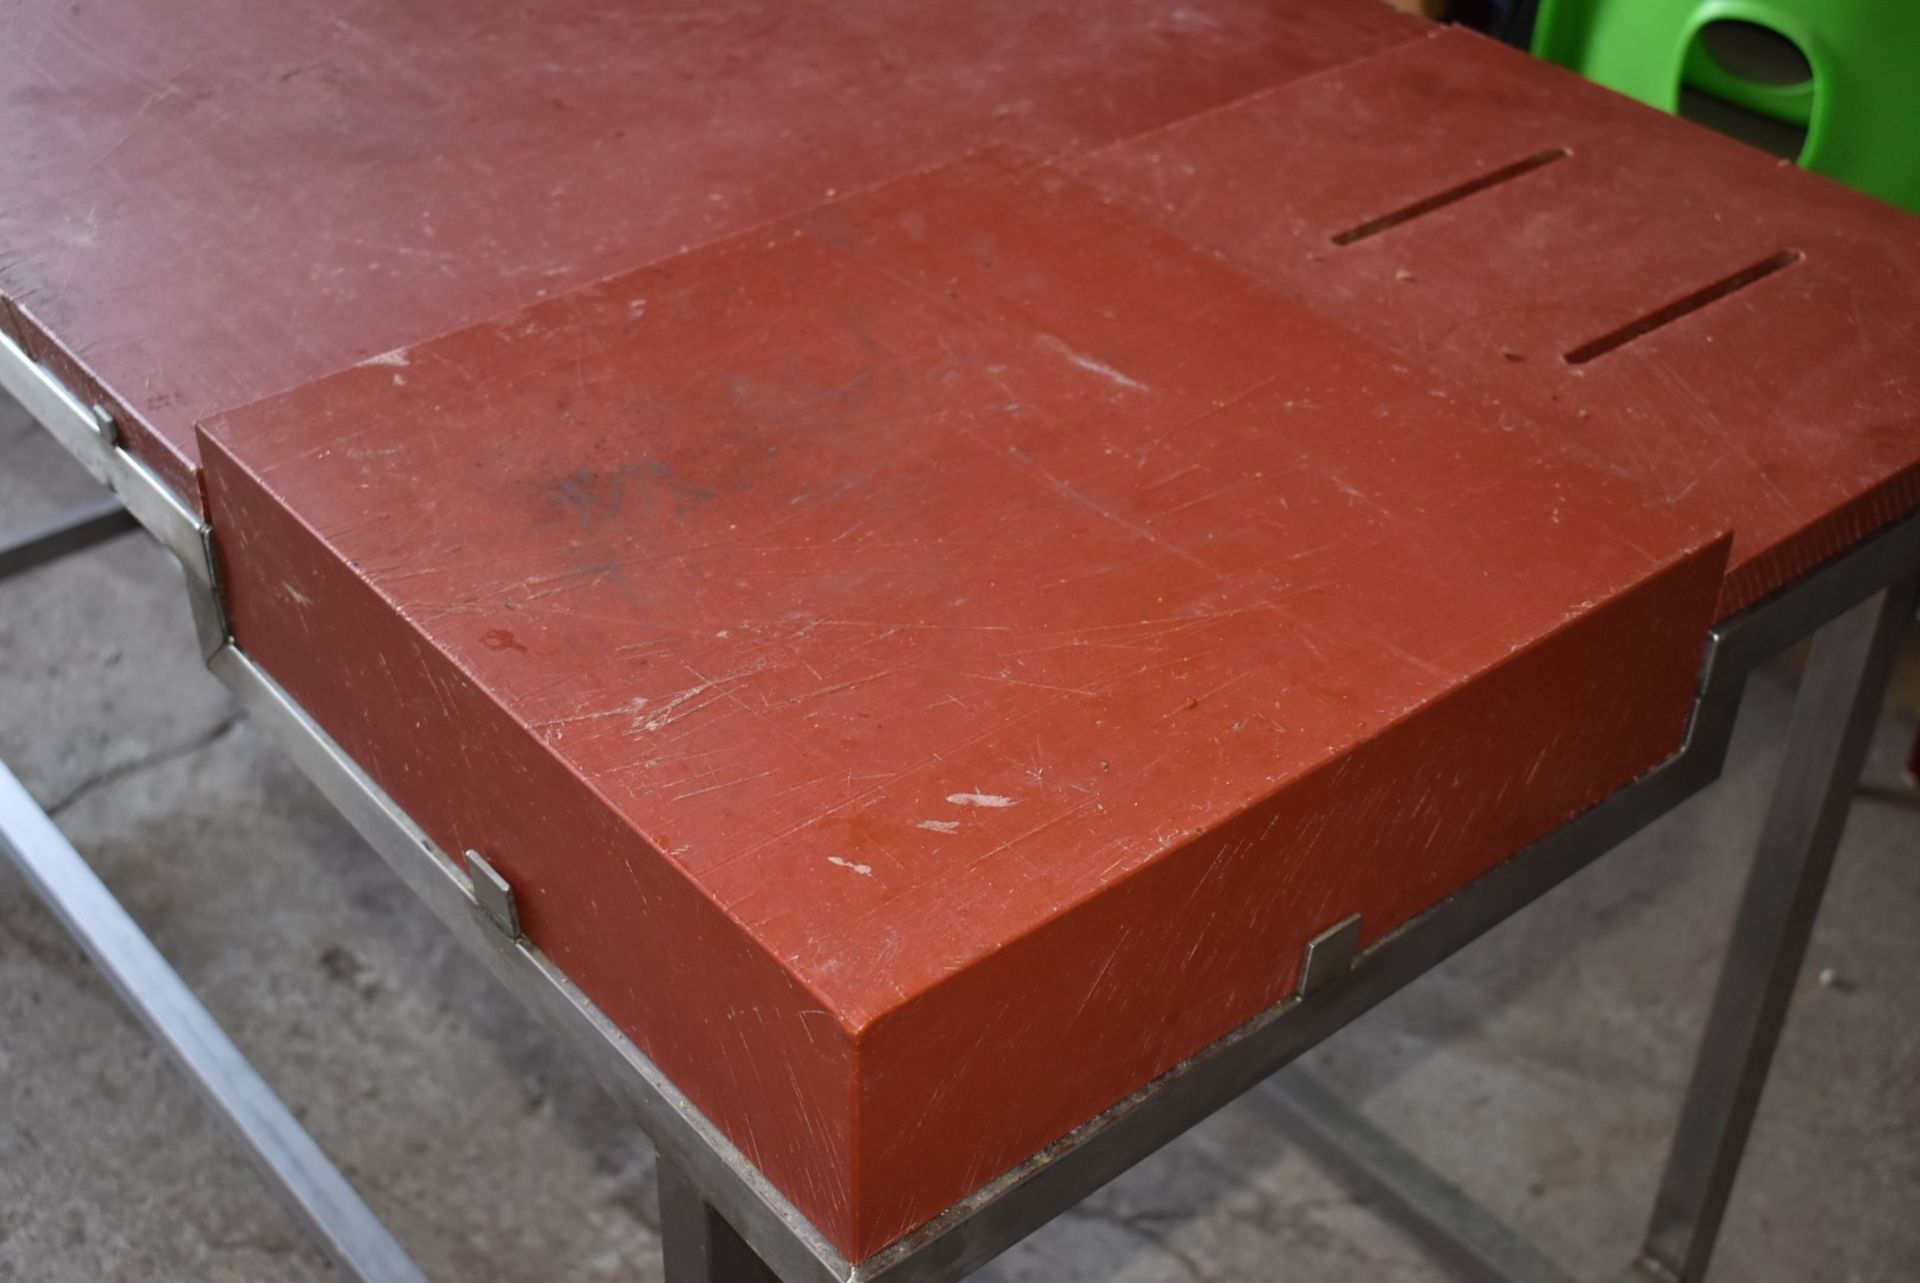 1 x Metal Craft Butchers Block Chopping Board With Large Poly Top Cutting Boards and Stainless Steel - Image 3 of 9